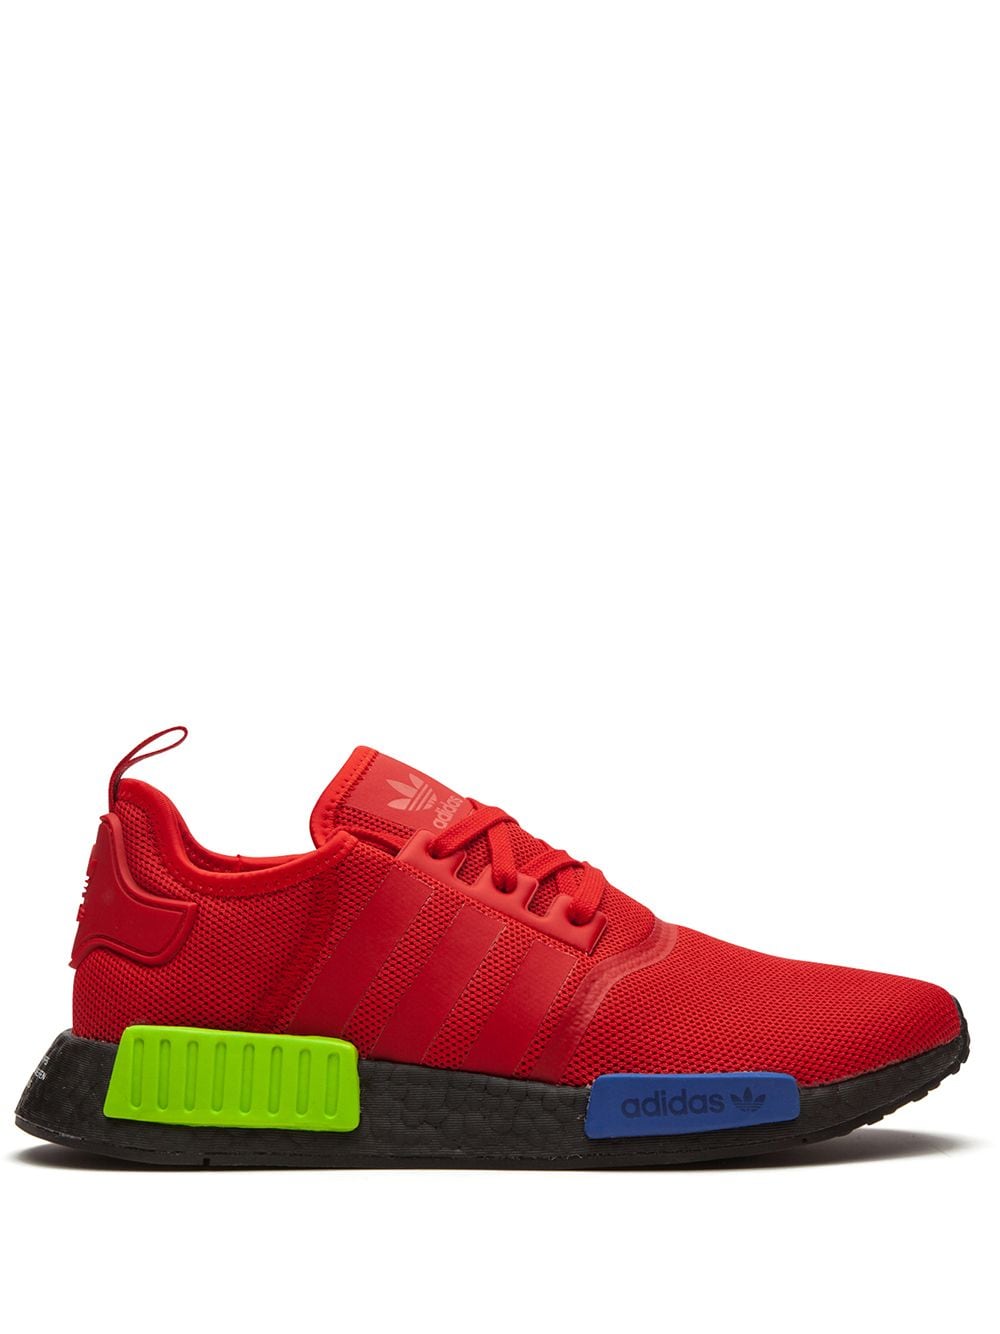 adidas NMD_R1 sneakers - Red von adidas